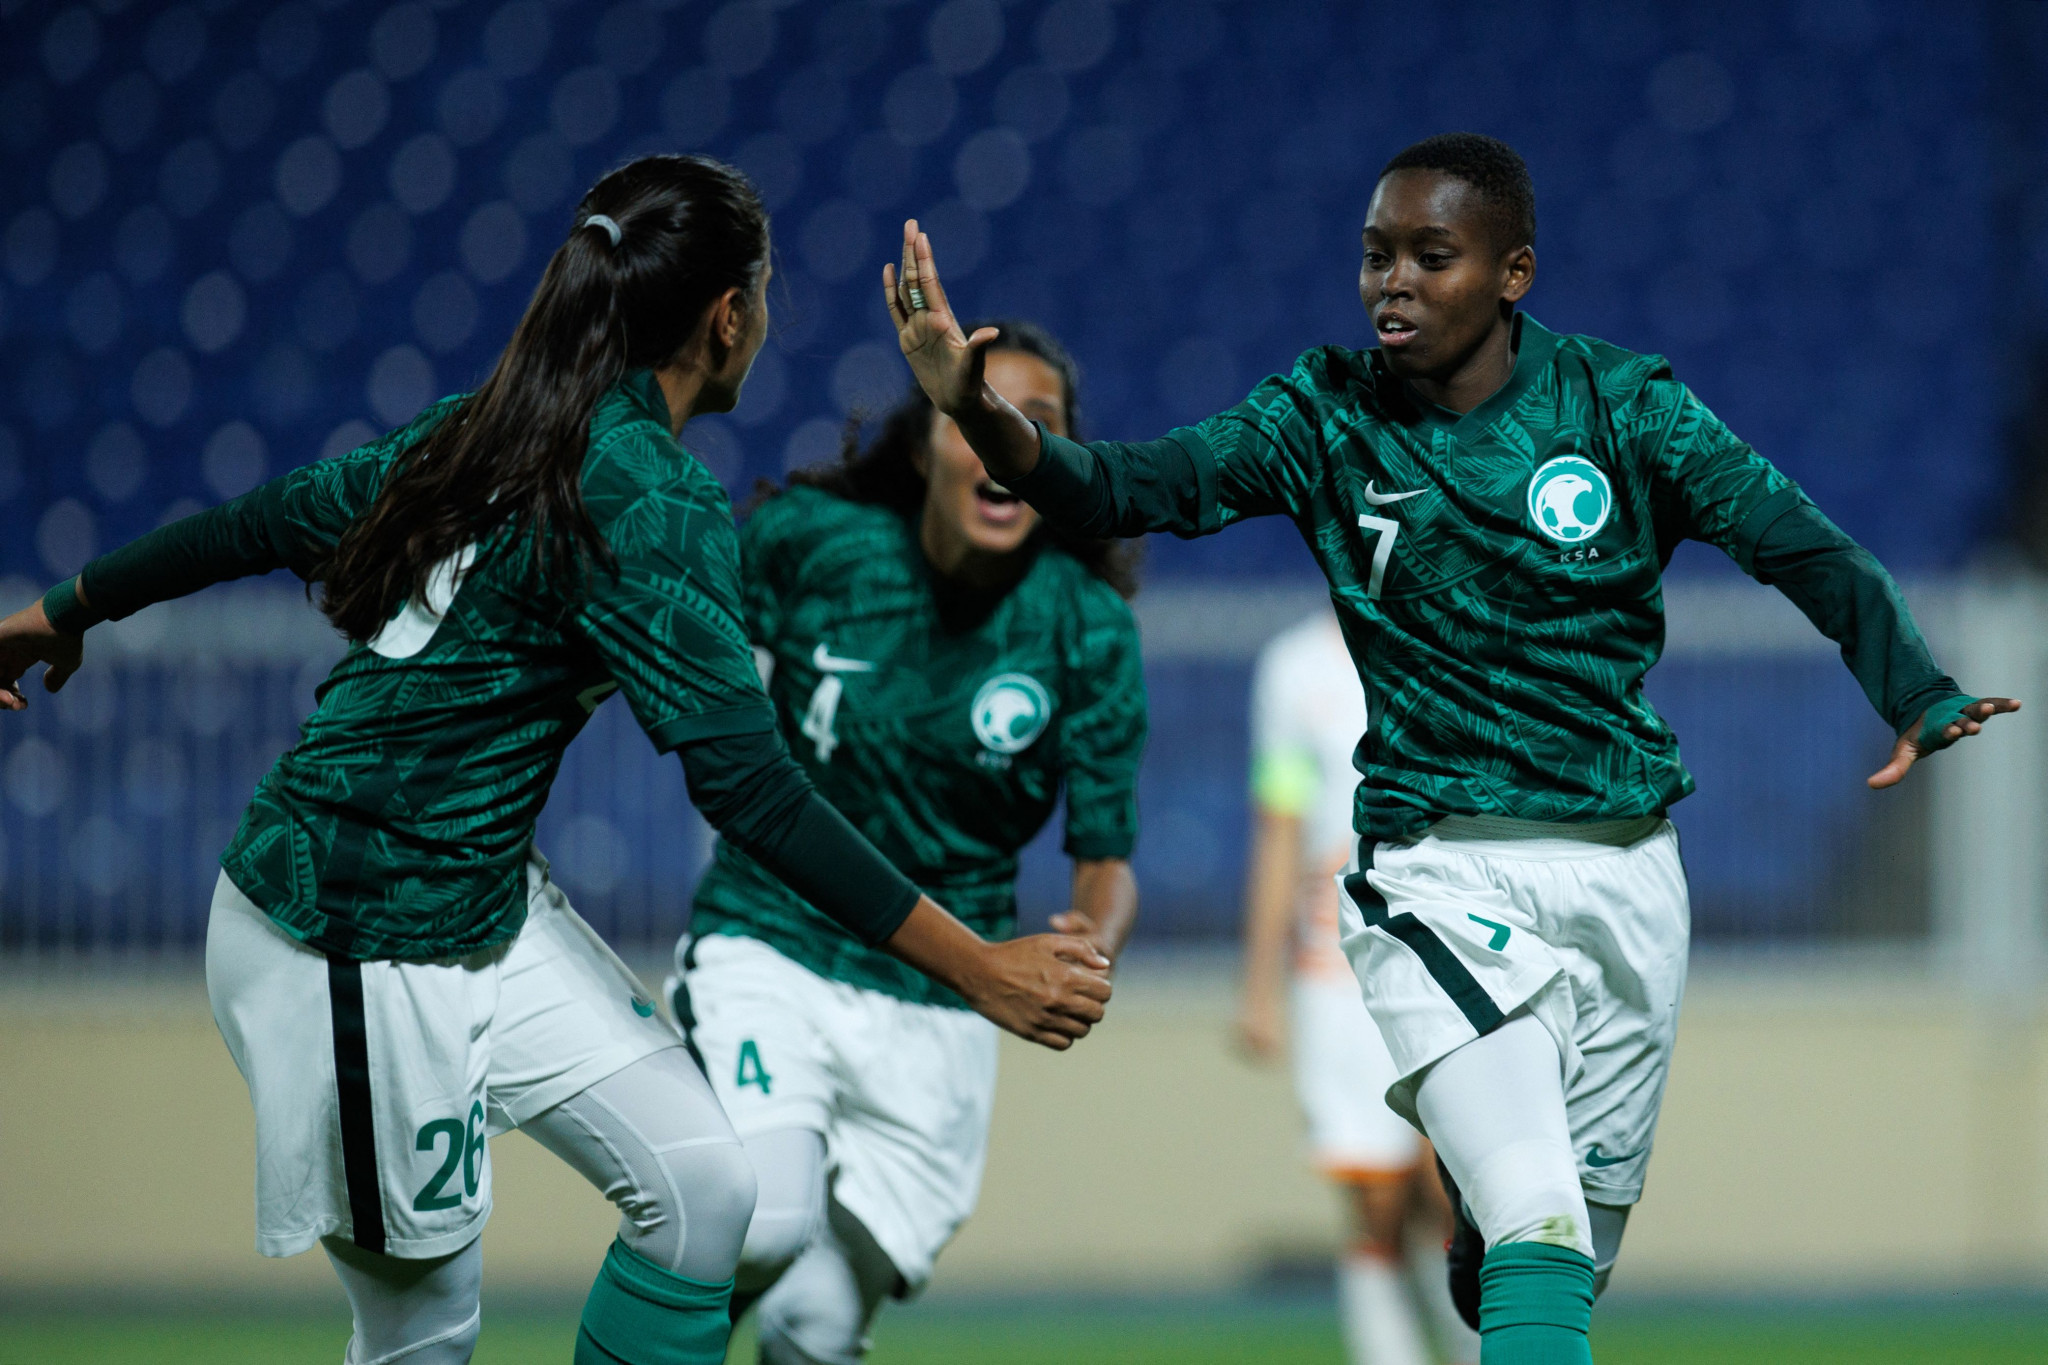 Saudi Arabia has officially submitted a bid to stage the AFC Women's Asian Cup for the first time in 2026 ©Getty Images